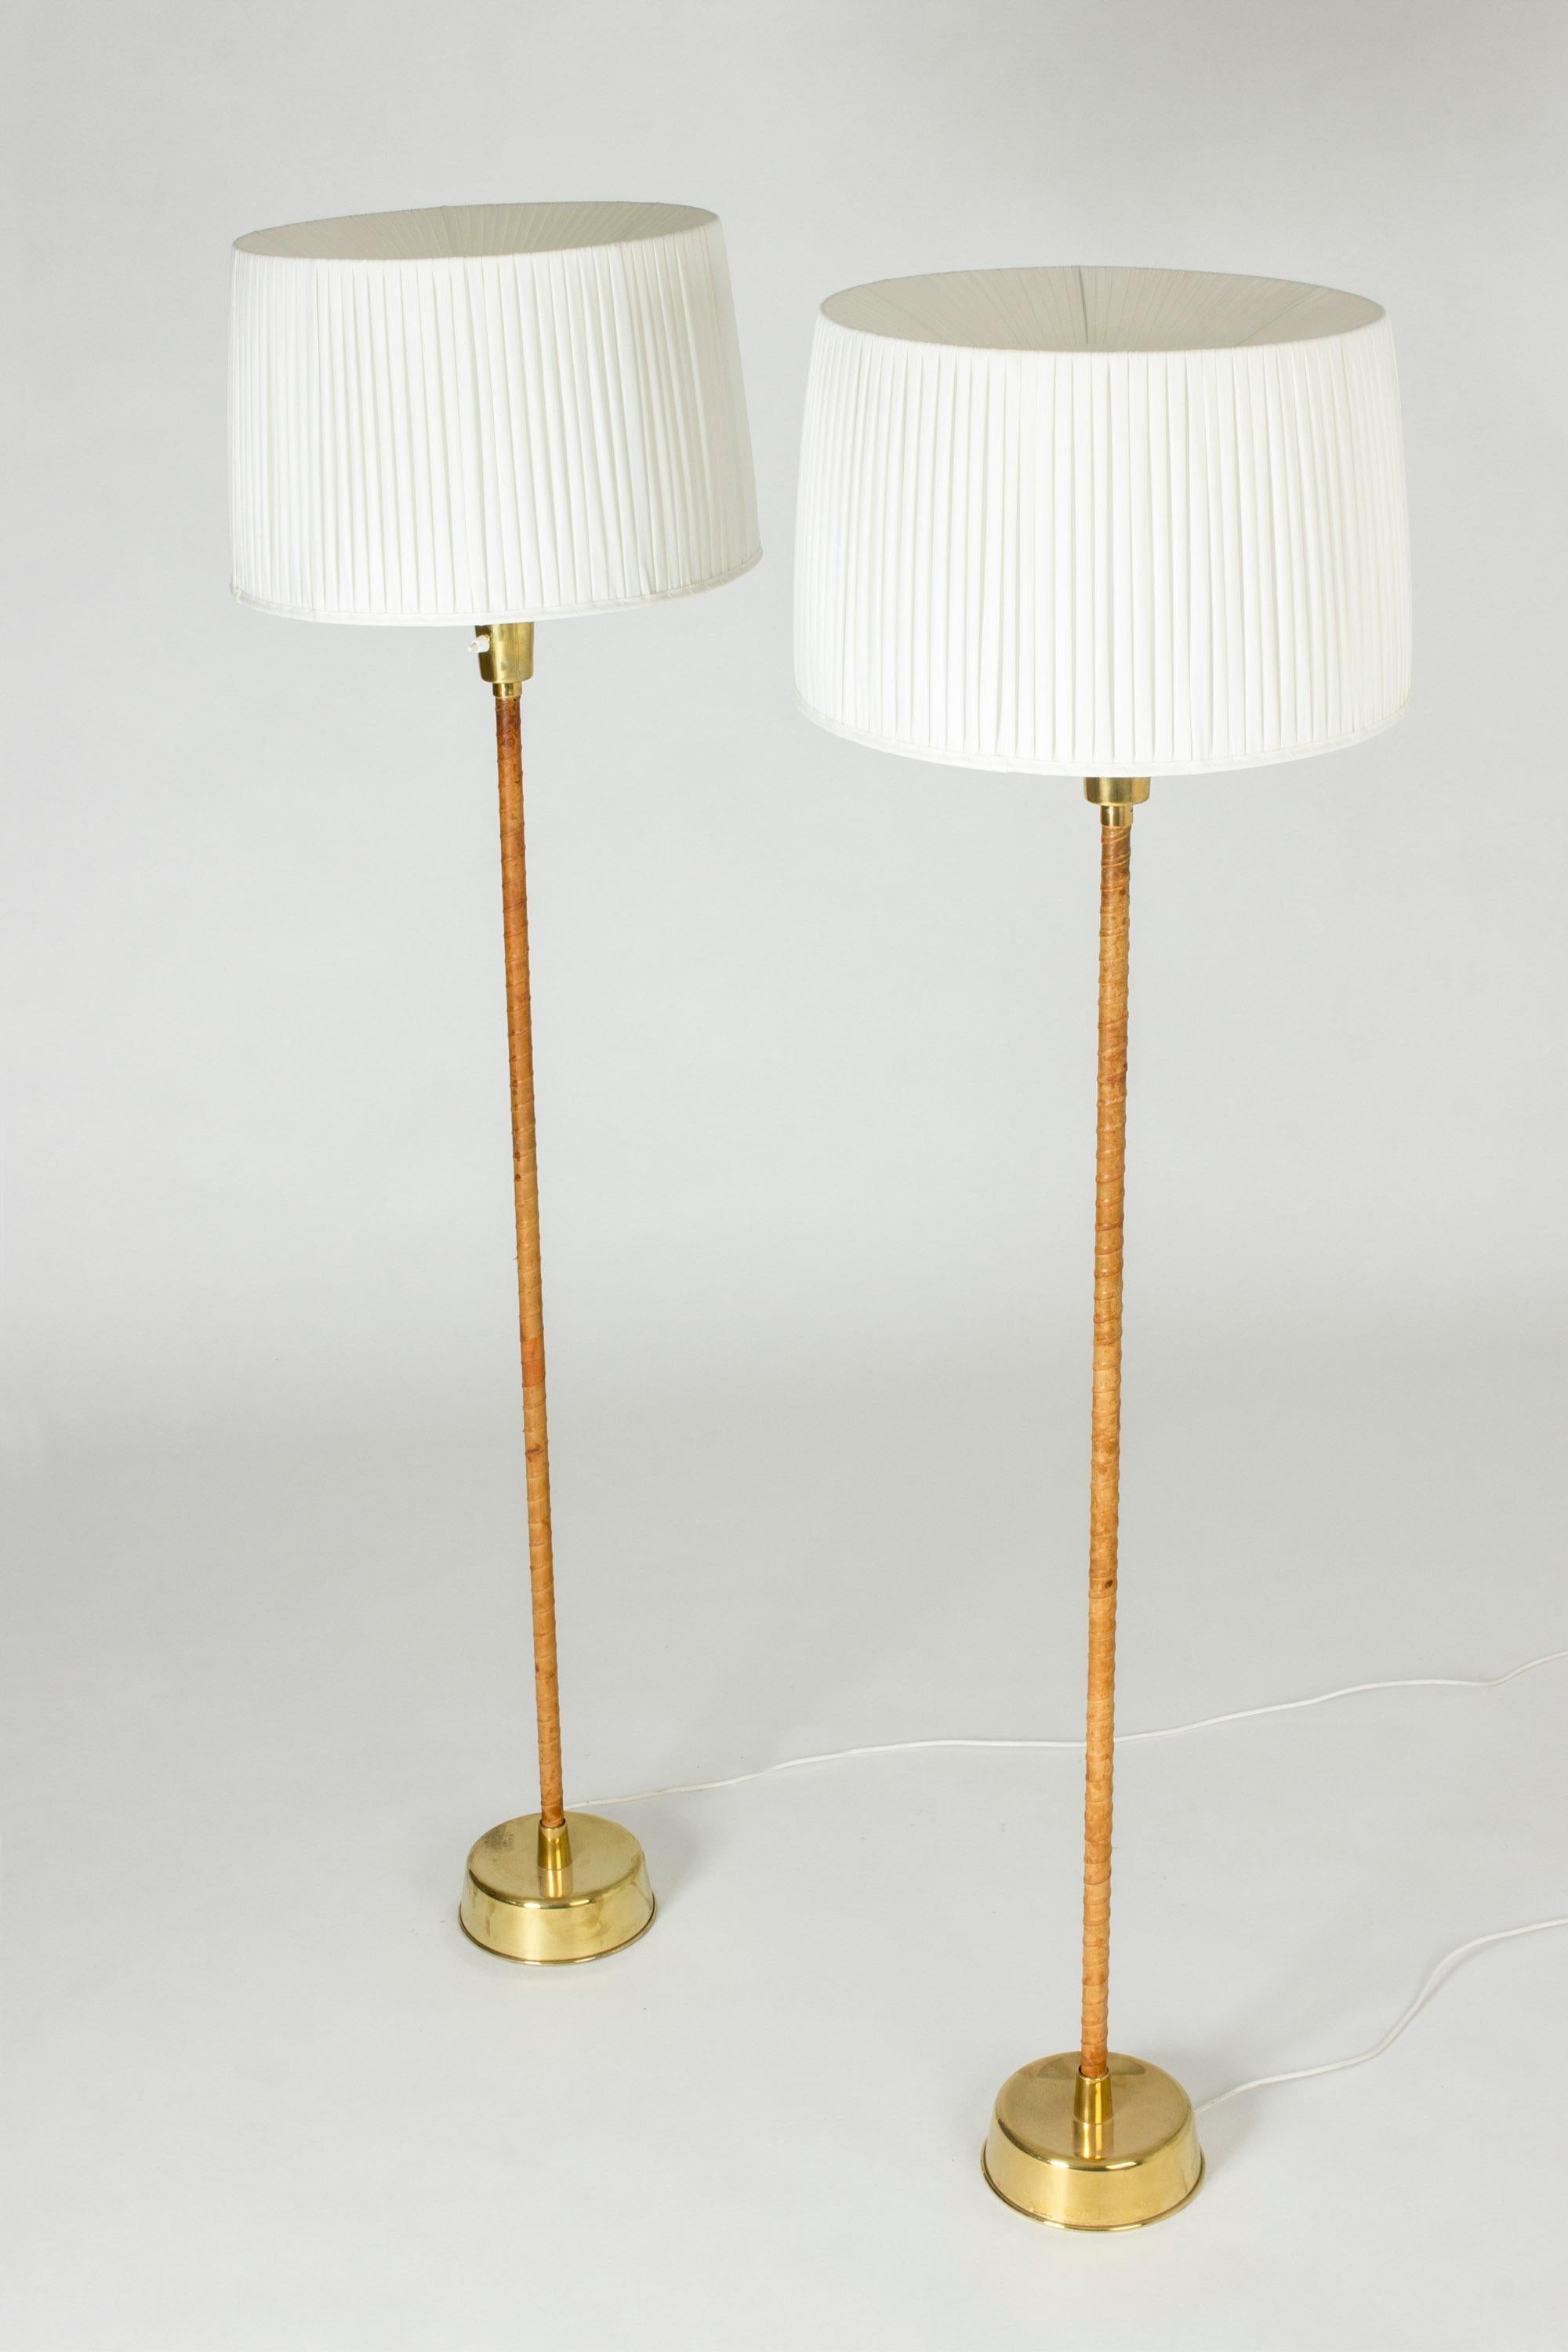 Mid-20th Century Pair of Floor Lamps by Lisa Johansson-Pape for Orno For Sale